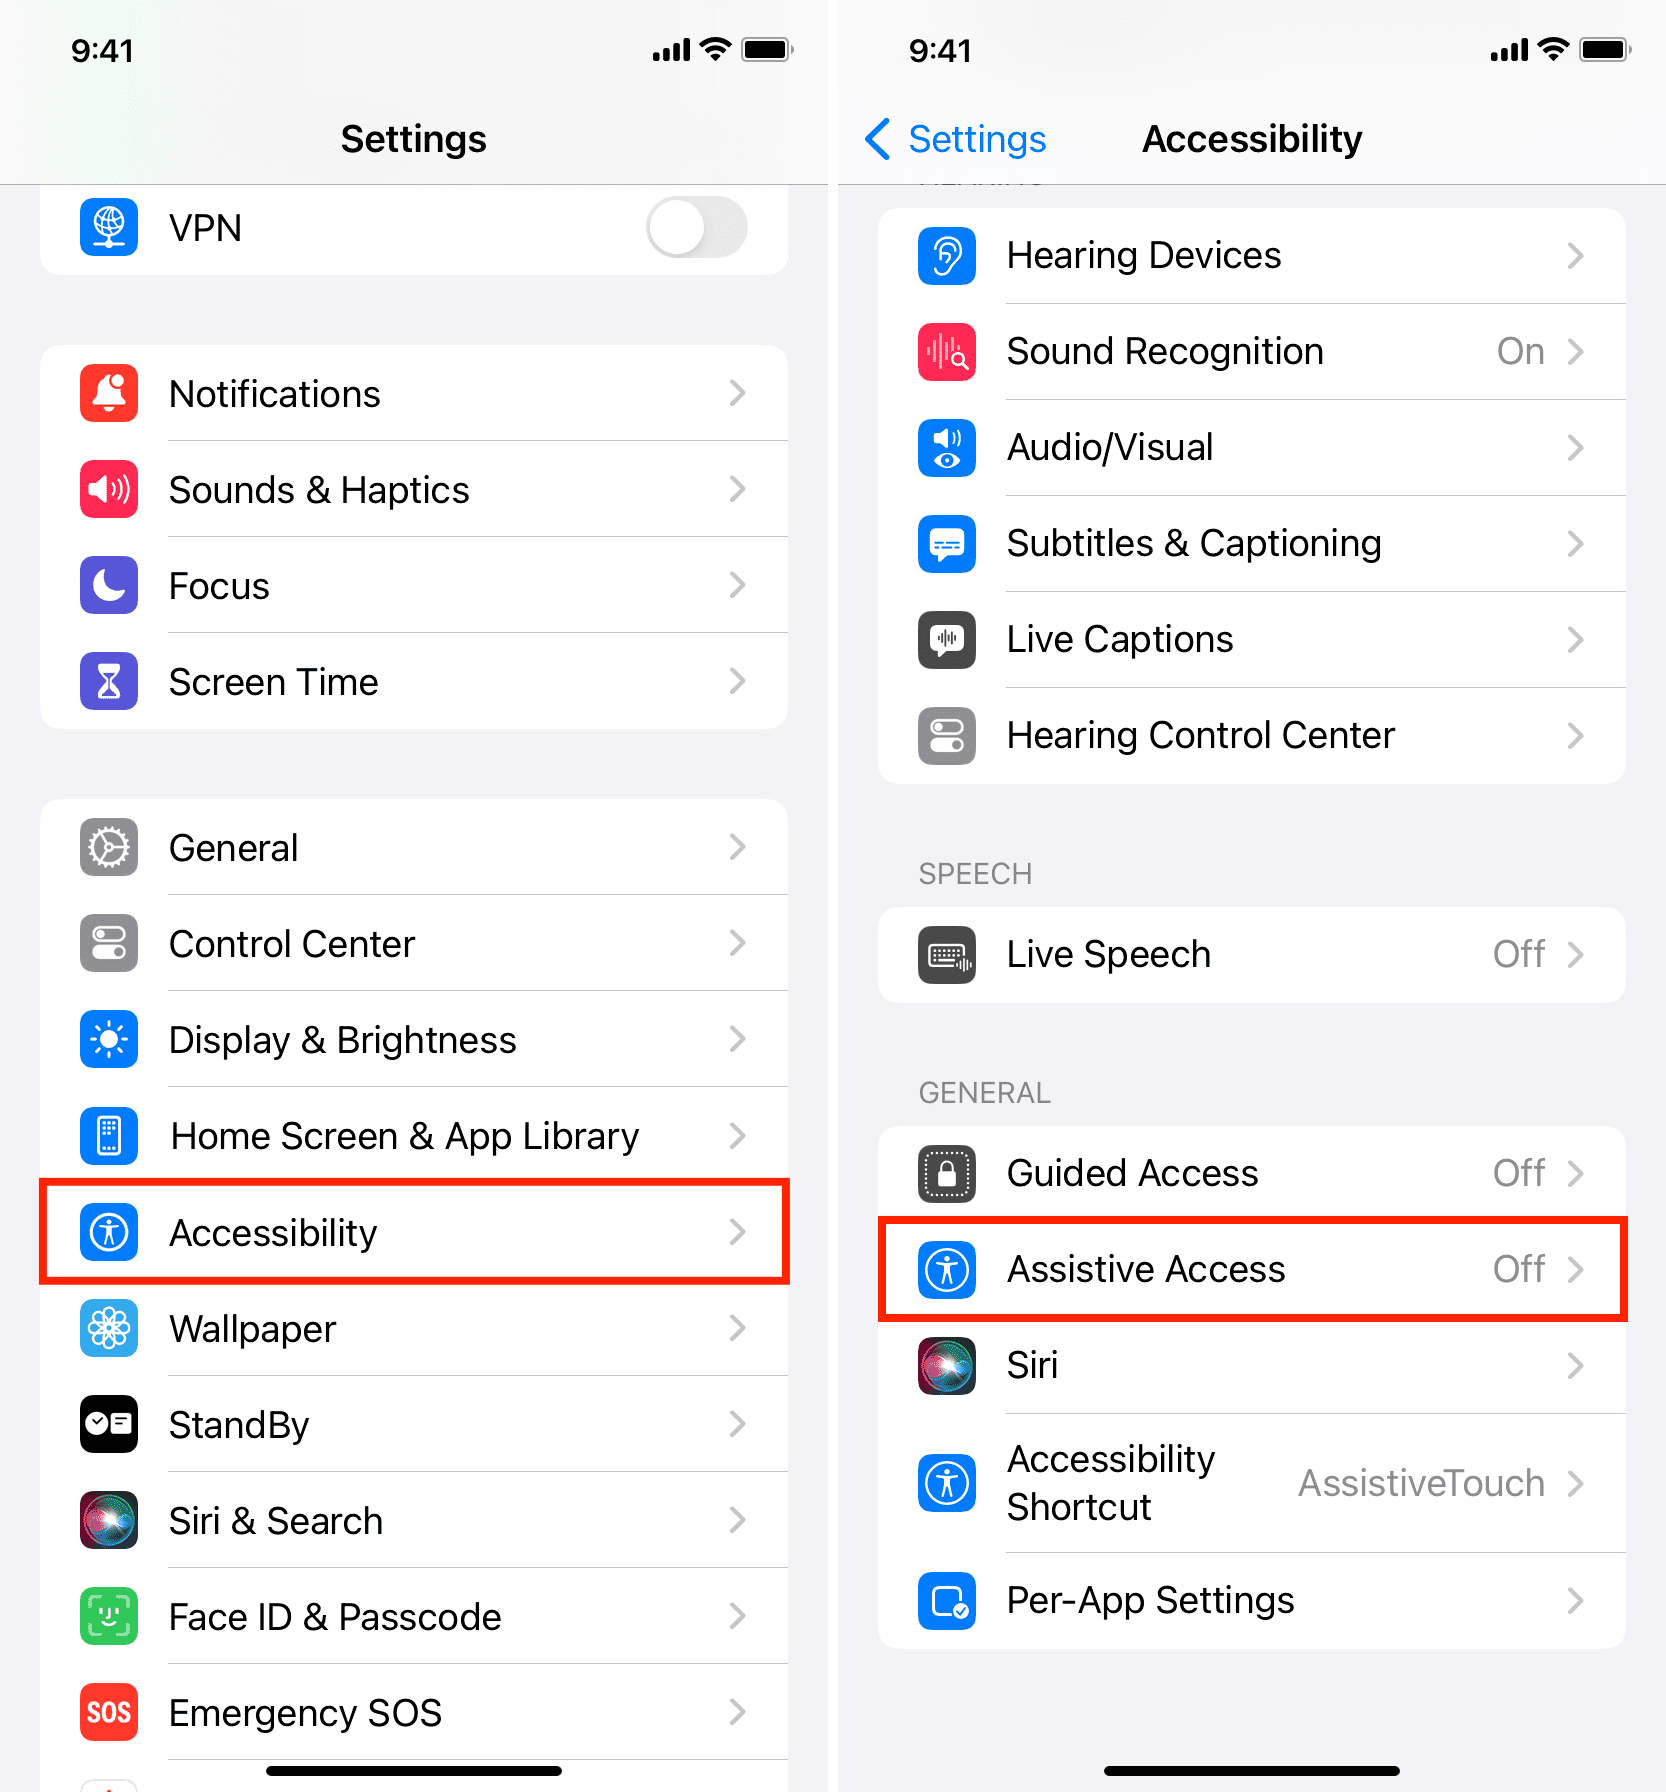 Assistive Access in iPhone Accessibility settings